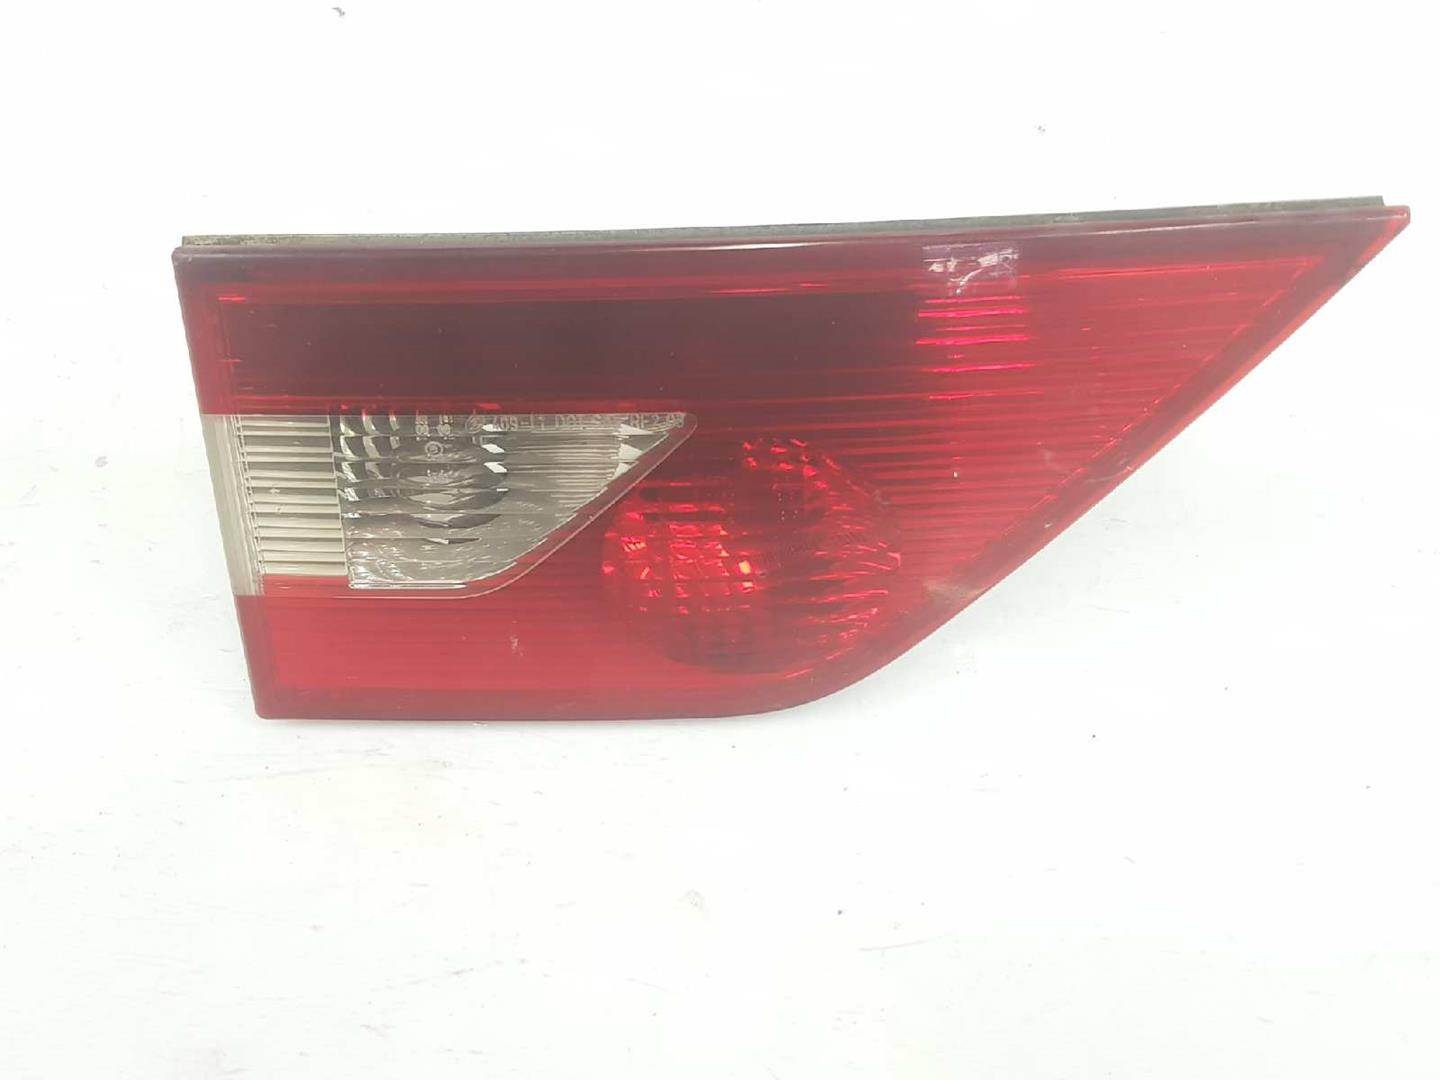 BMW X3 E83 (2003-2010) Left Side Tailgate Taillight 63213420203, 63213420203 19901310